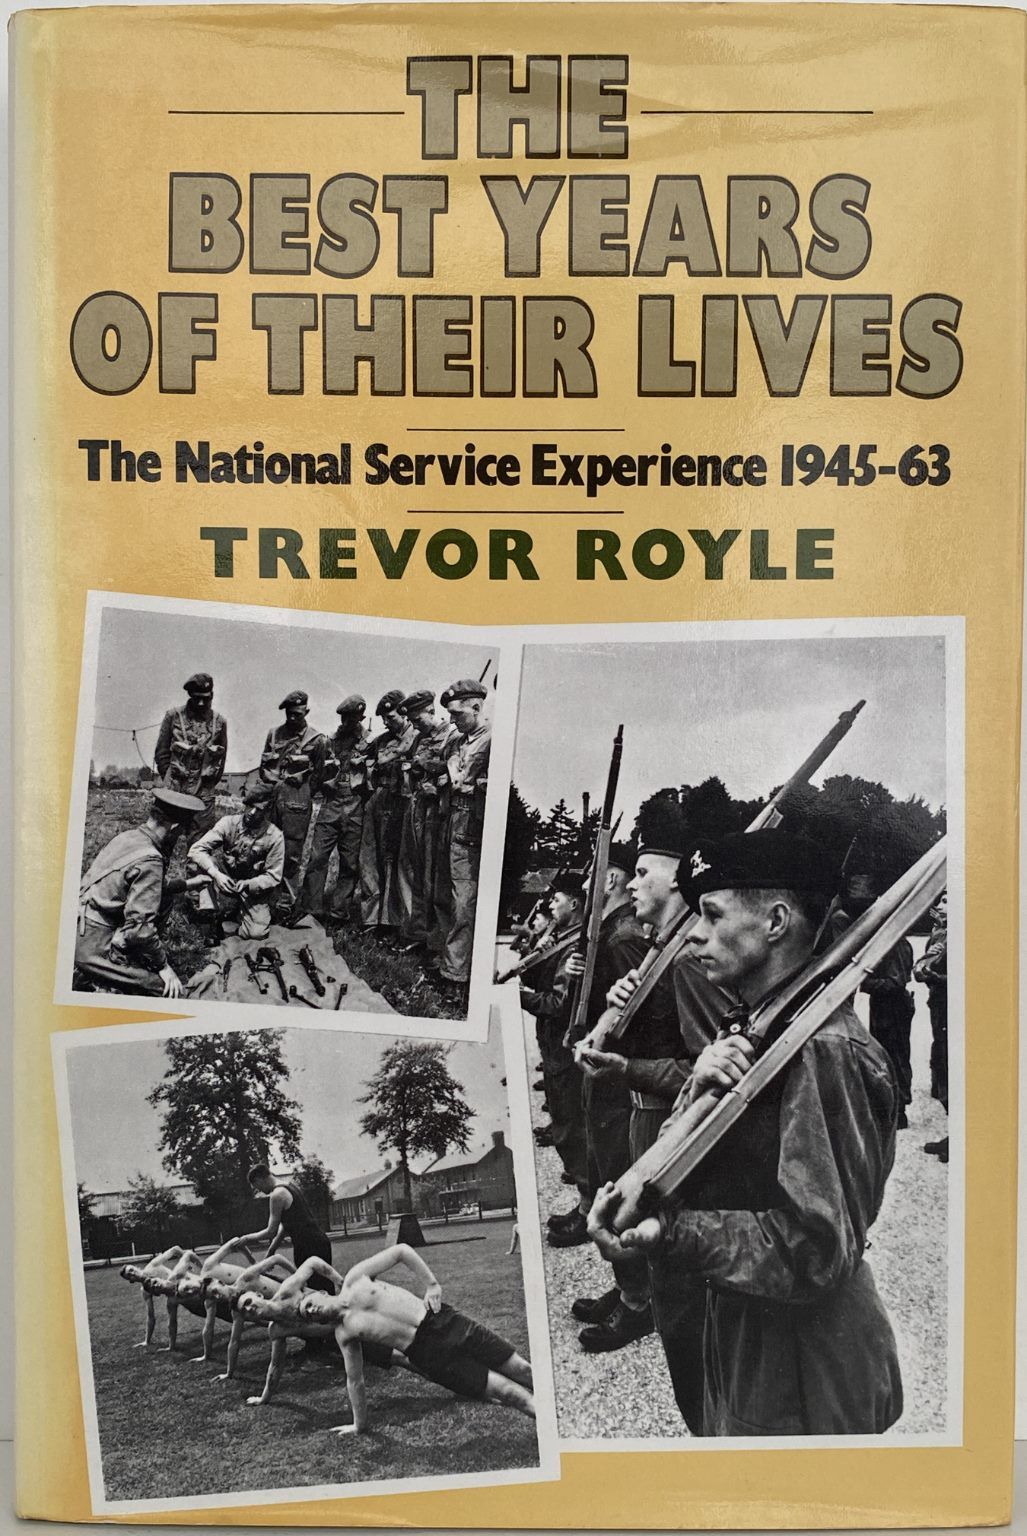 THE BEST YEARS OF THEIR LIVES: The National Service Experience 1945 - 63